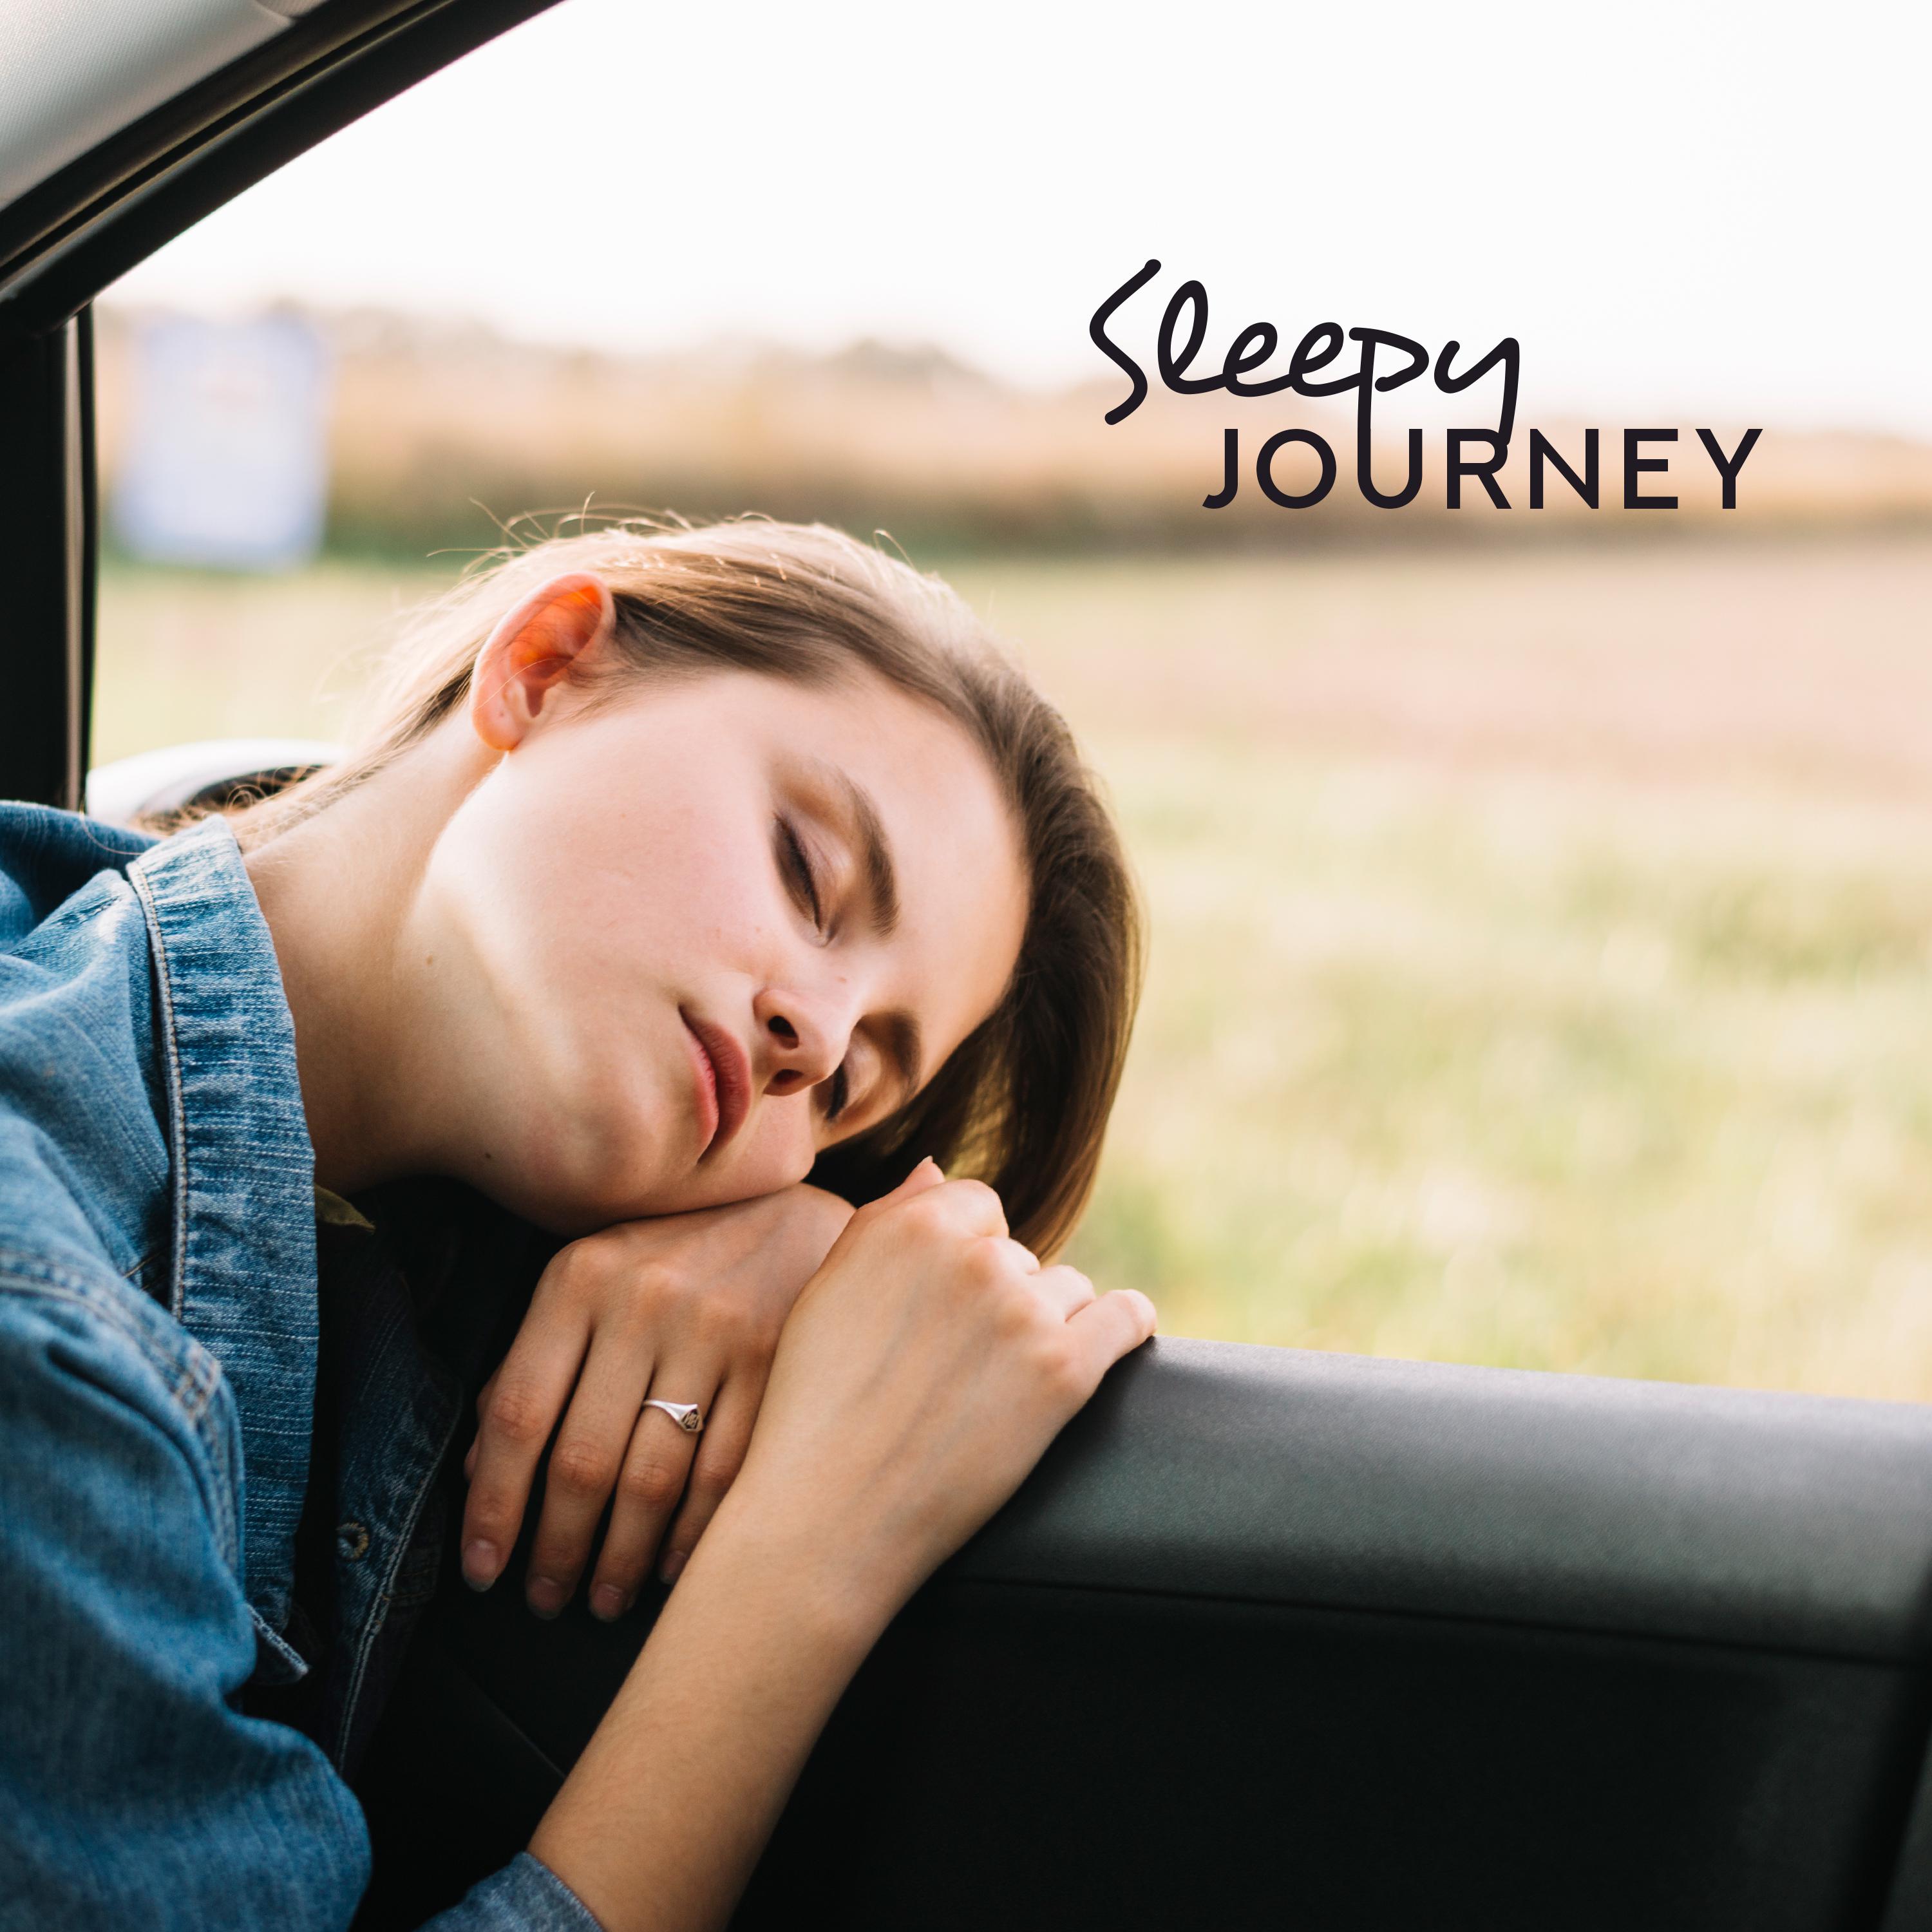 Sleepy Journey – Music to Sleep while Traveling, to Sleep while Driving a Car, Train or Plane, Helps to Quickly and Easily Fall Asleep Anywhere